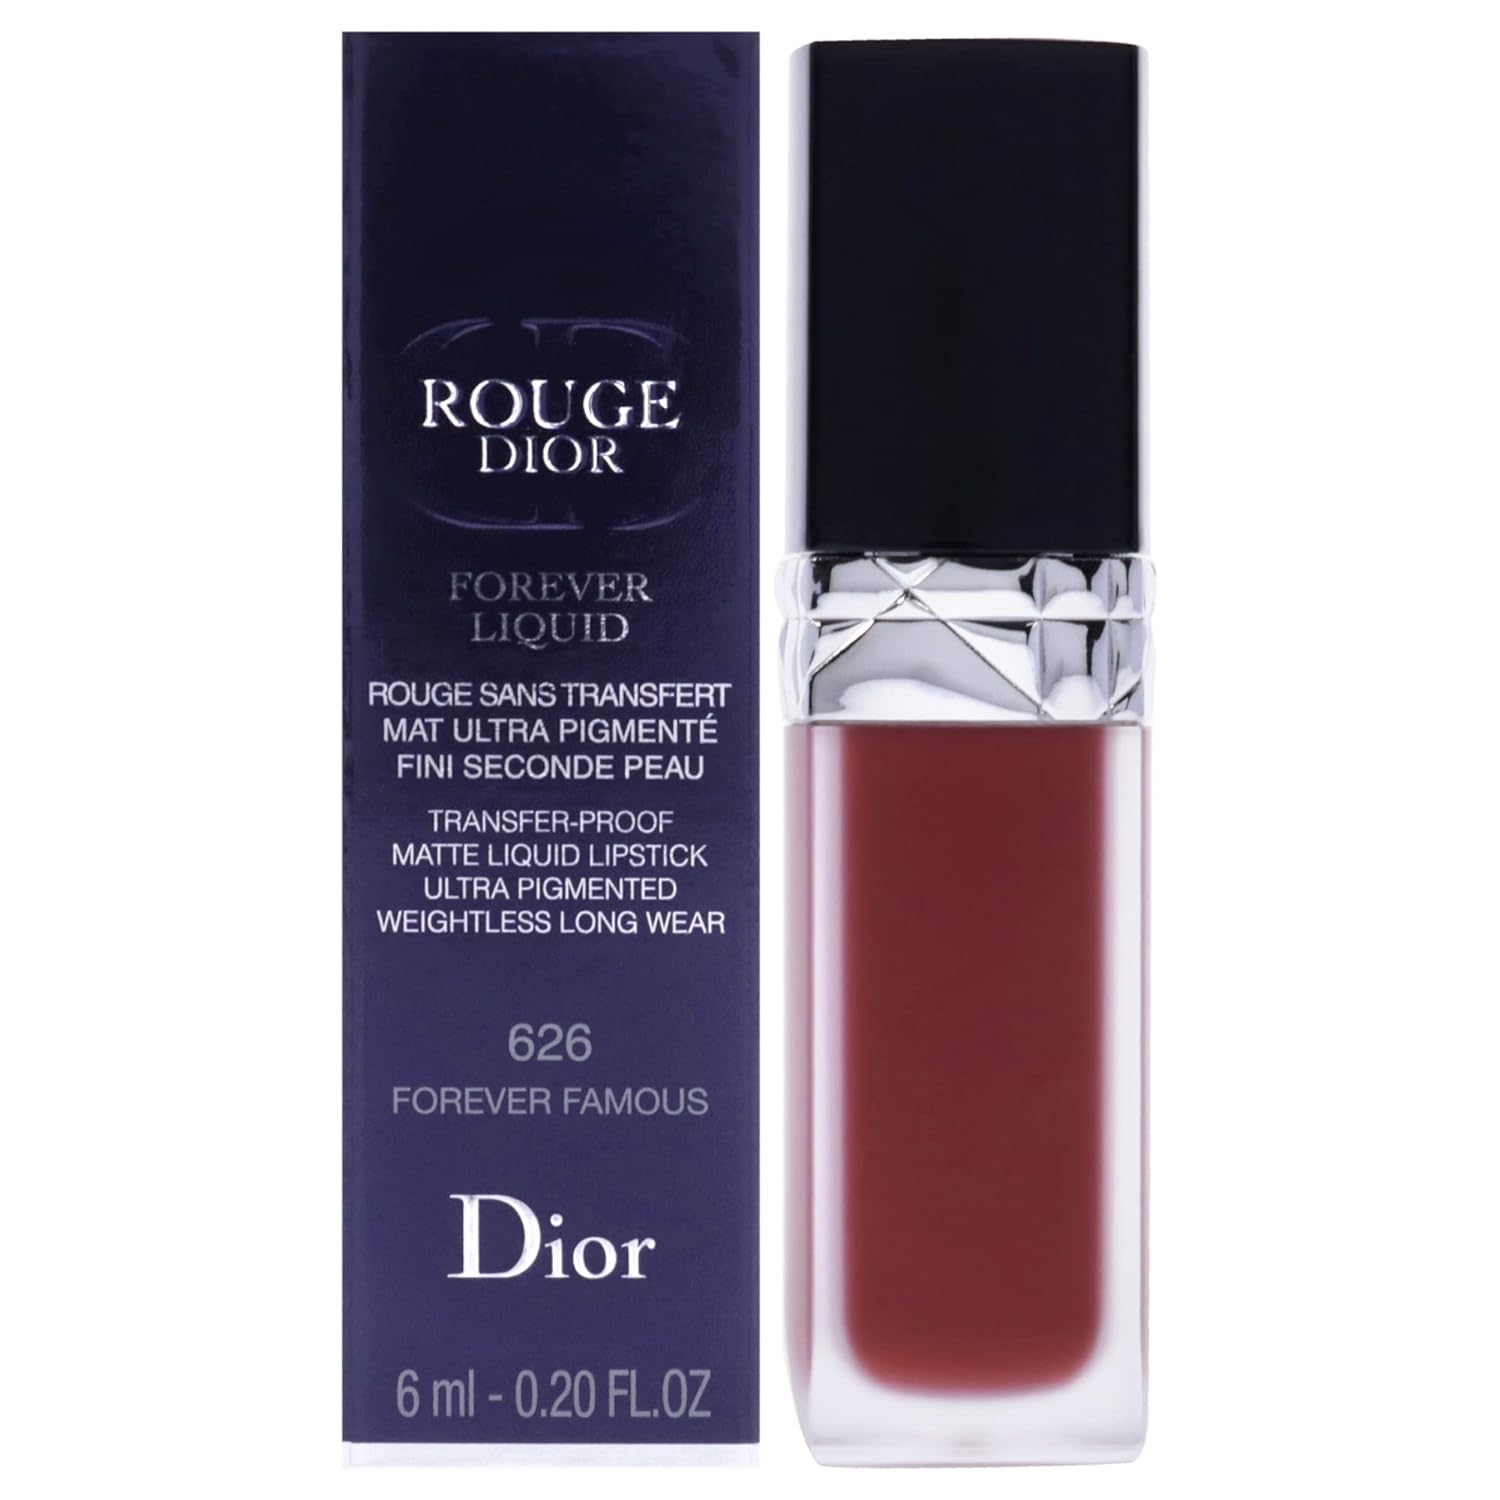 DIOR Rouge Dior Forever Liquid 626 Forever Famous, 6 ml